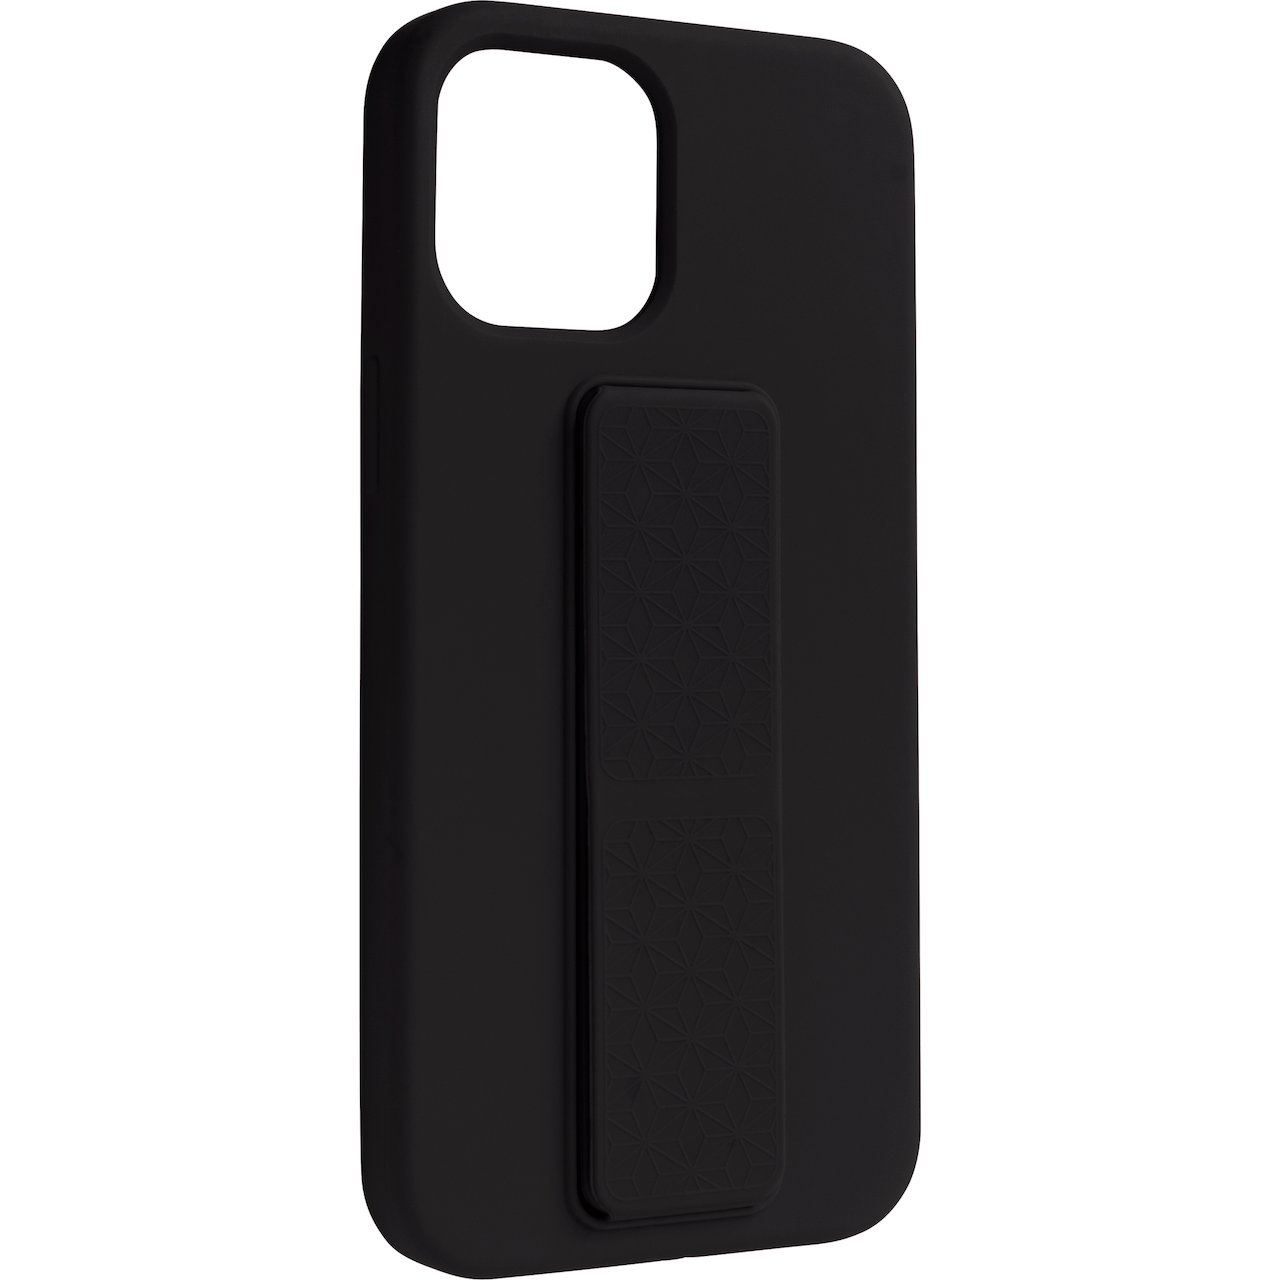 LEKI BYCPH COVER TIL IPHONE 12 PRO MAX GRIP AND STAND SILIKON SORT